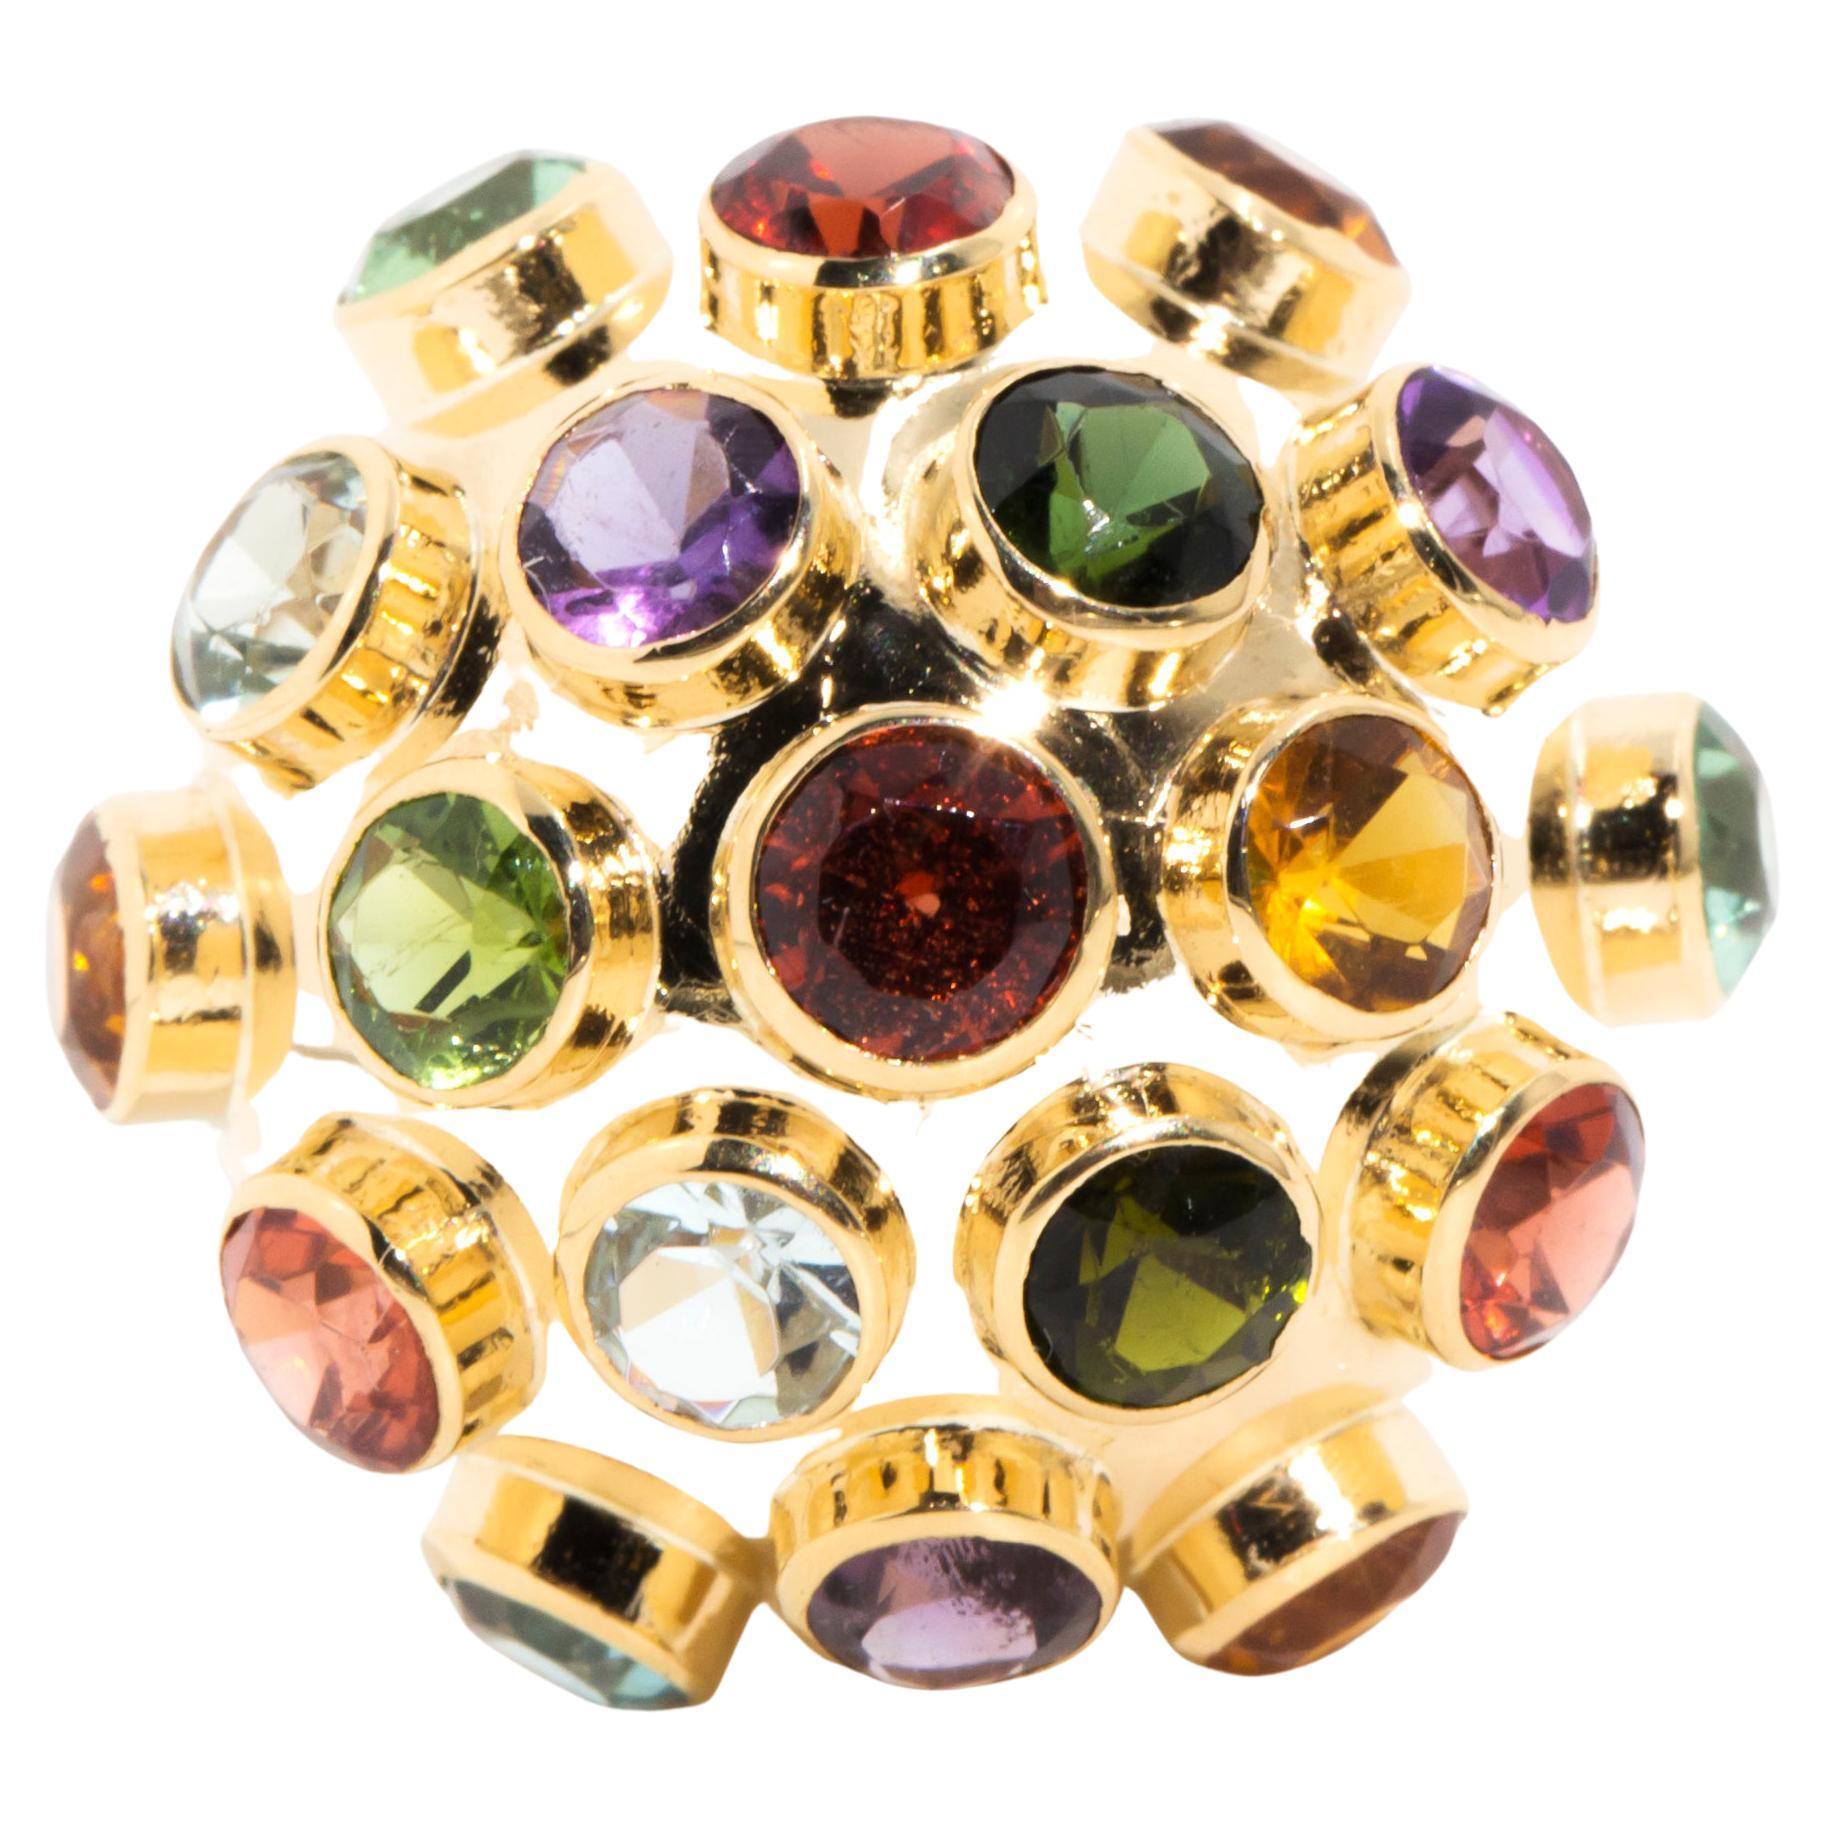 Forged in 18 carat yellow gold, this unique vintage dome ring features nineteen vibrant round gemstones set in a domed 